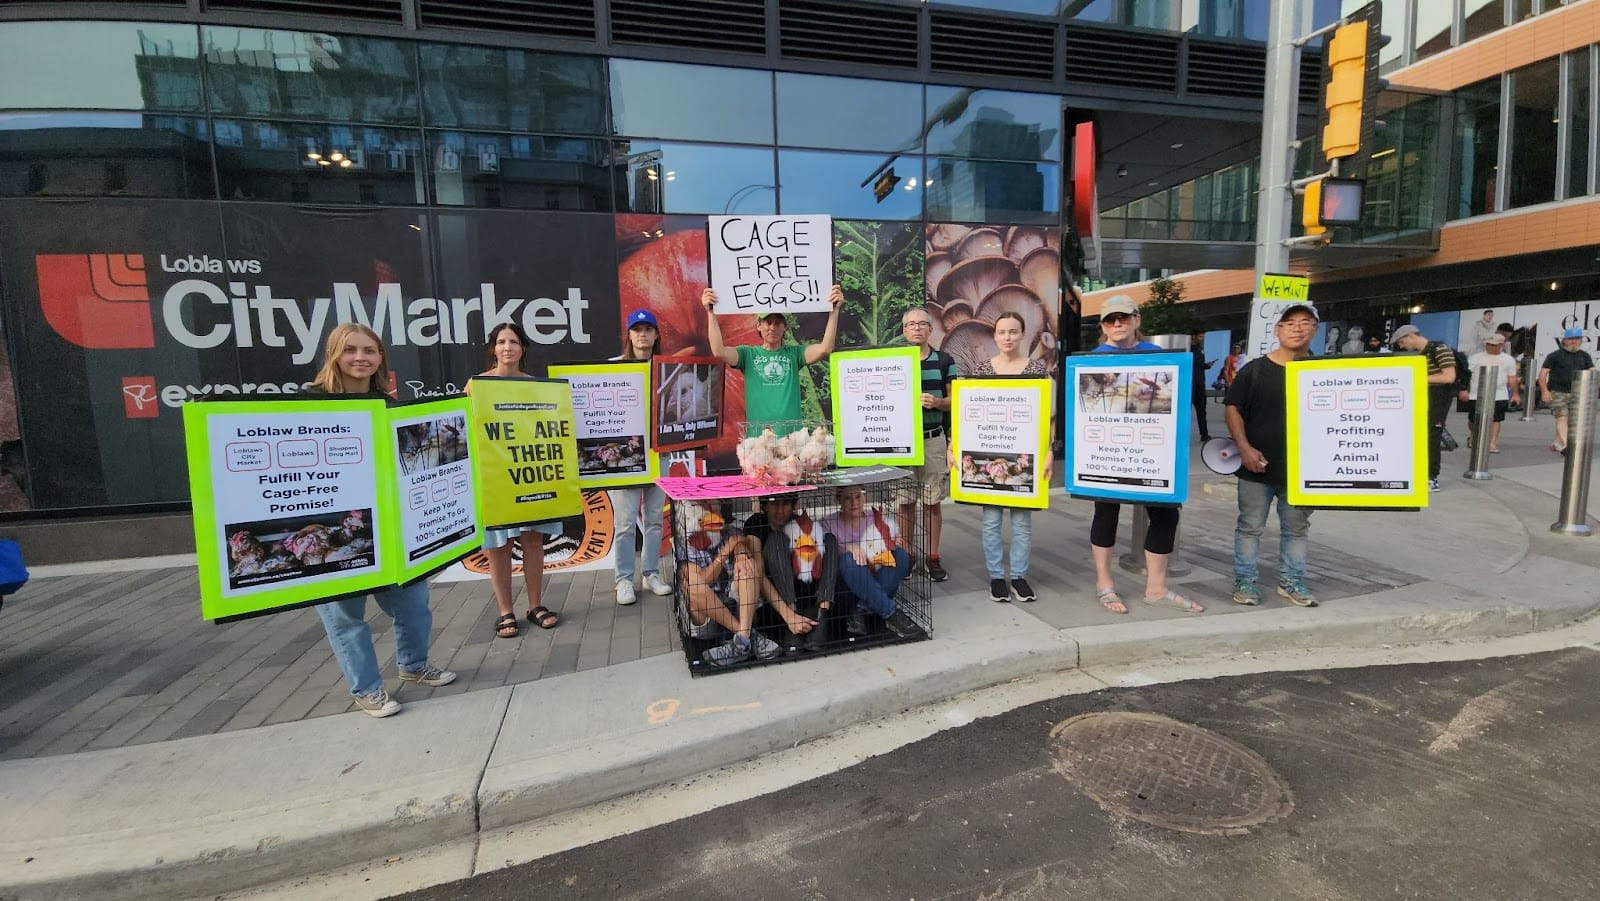 Image shows protesters in Edmonton outside Loblaws City Market. Protesting Loblaws failing to keep cage-free egg promise.